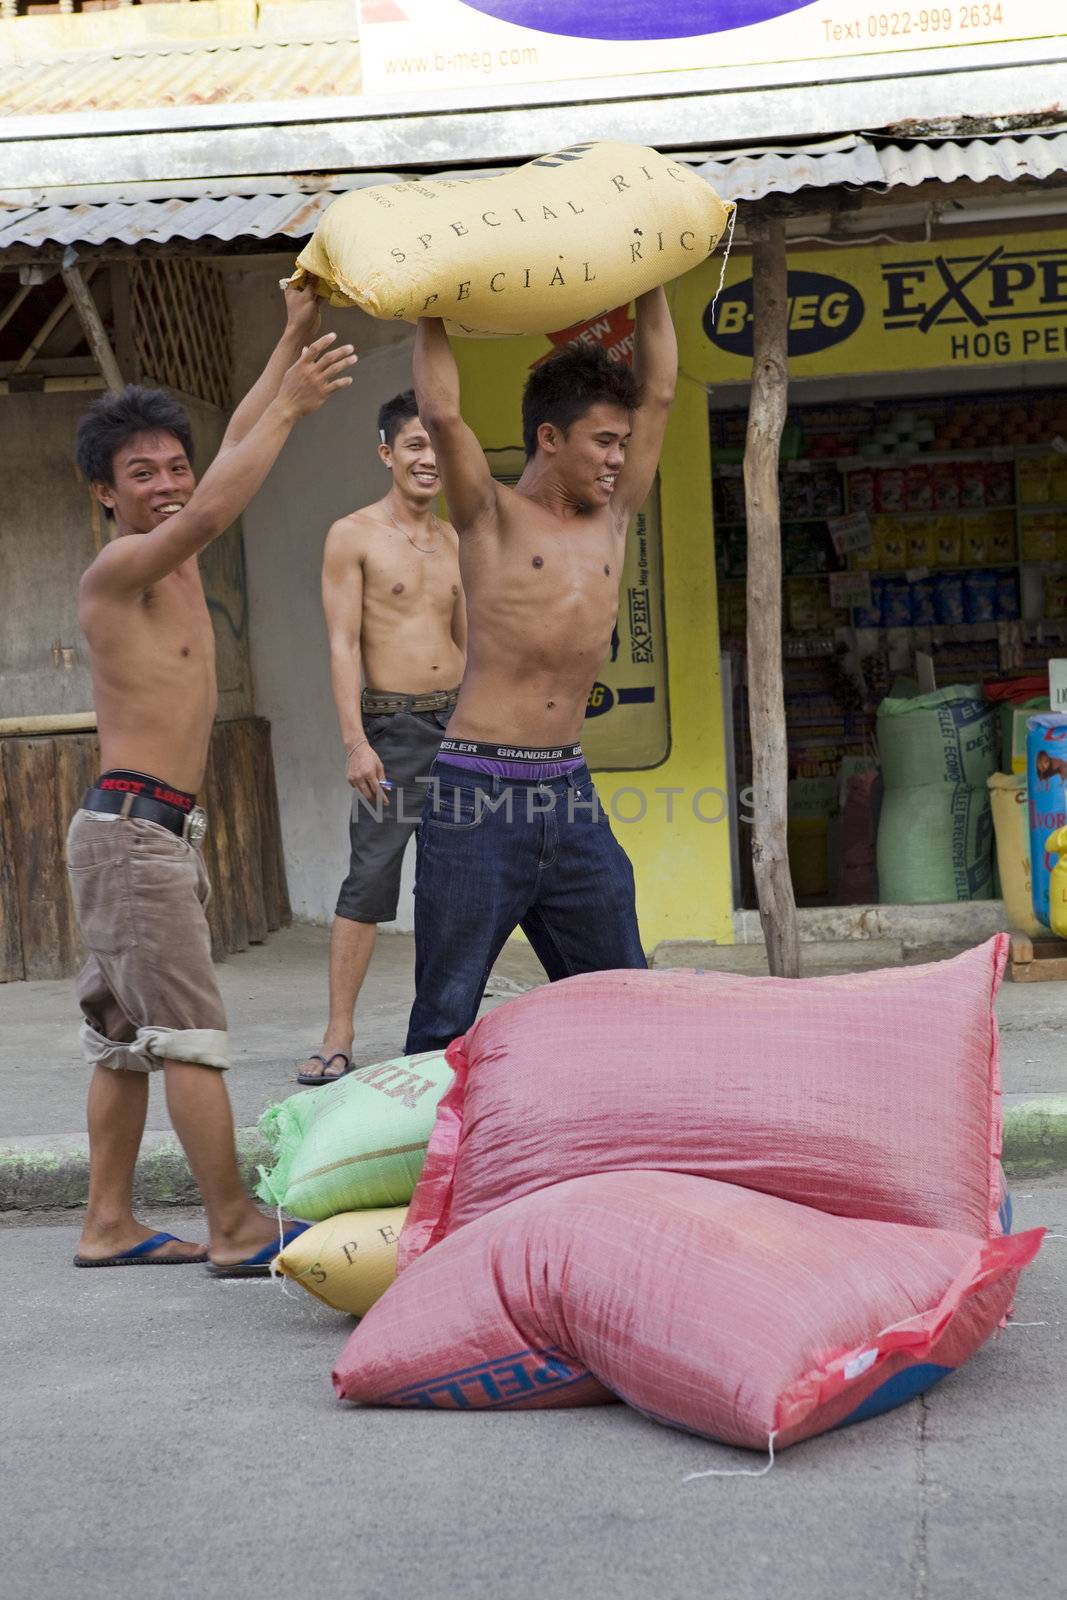 May 2010 - Bogo City, Cebu, Philippine Islands - Three teenage boys carrying 50 kilo sacks of white rice to a storage warehouse. Rice is the most important grain crop in the Philippine Islands.